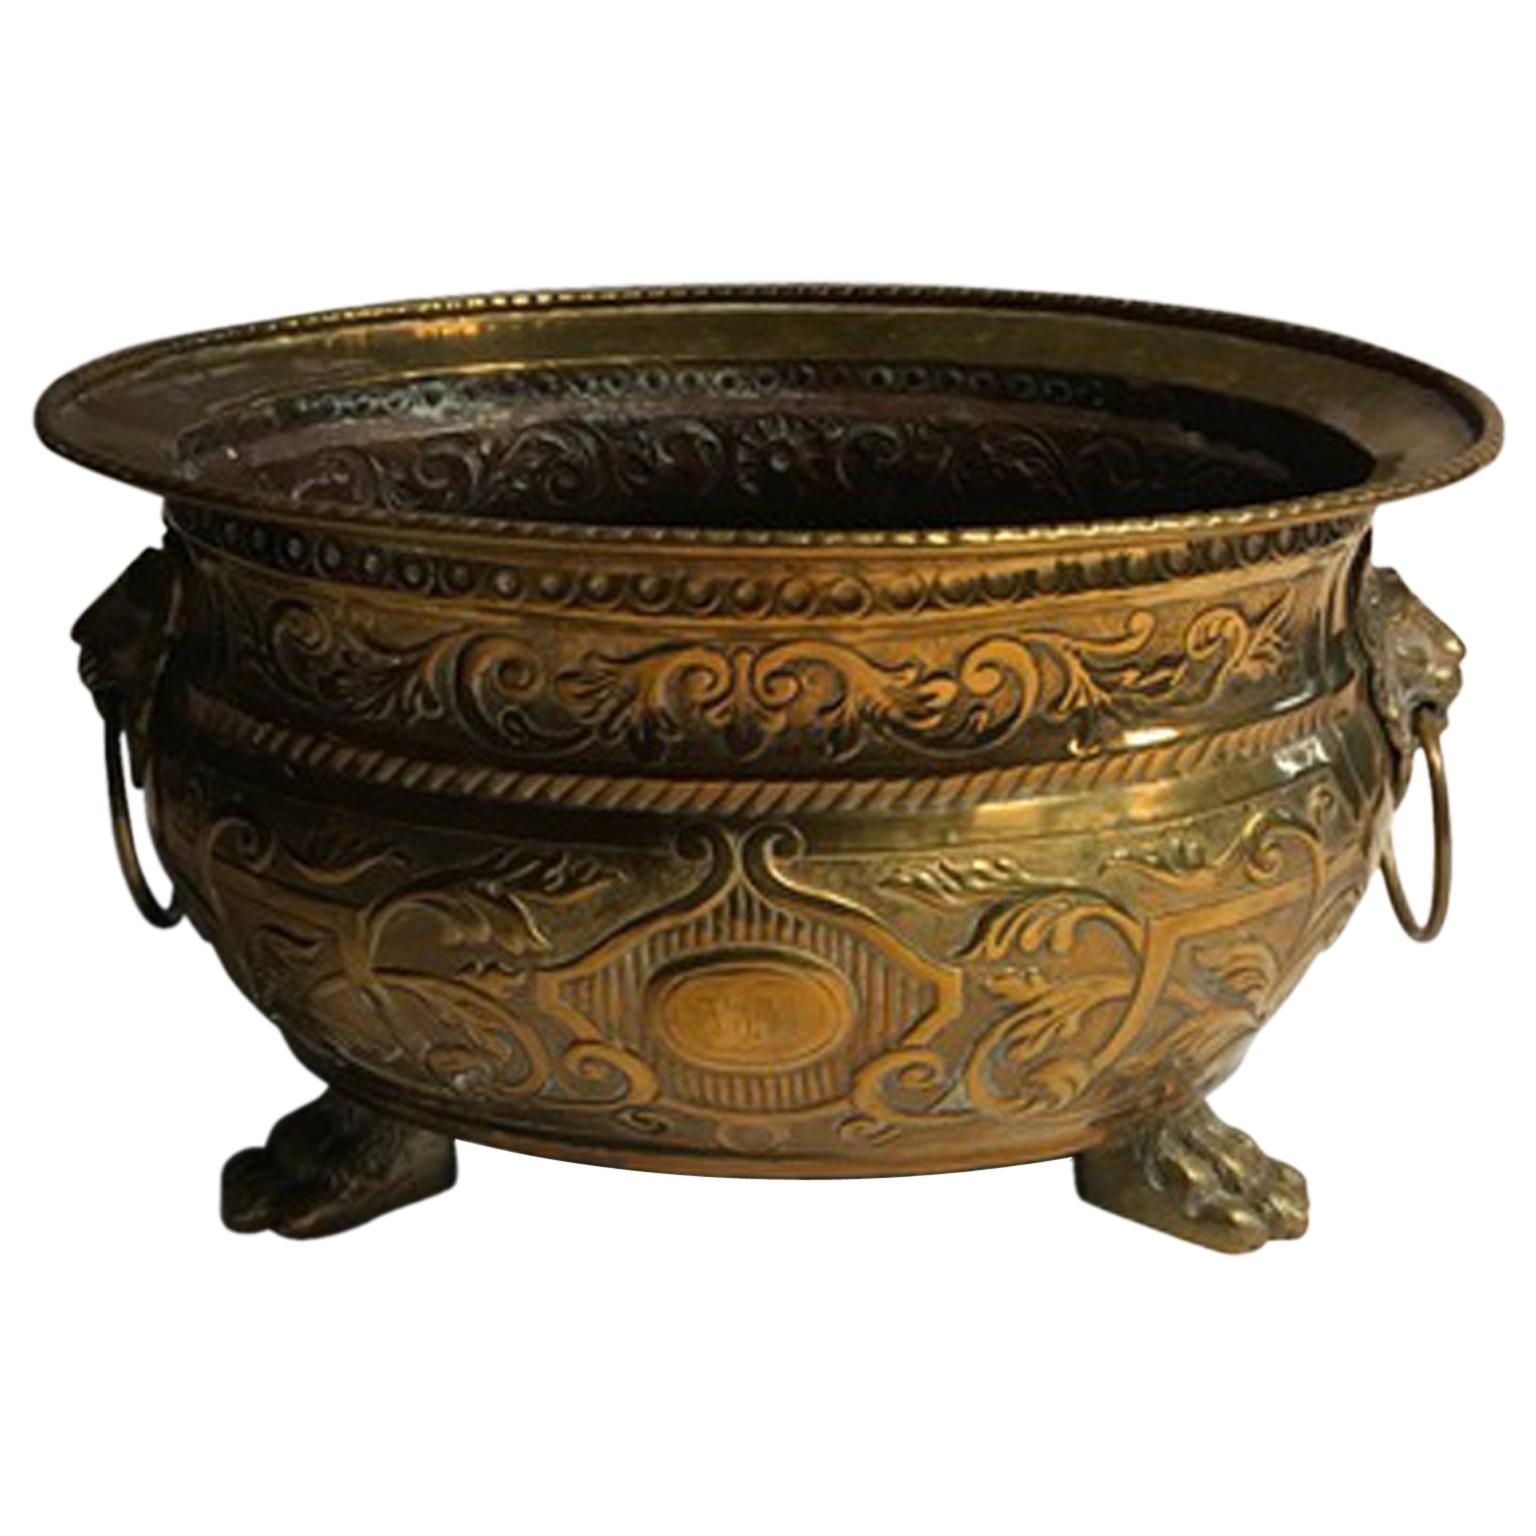  Early 20th Century Italy Brass Planter Bowl with Lions Heads For Sale